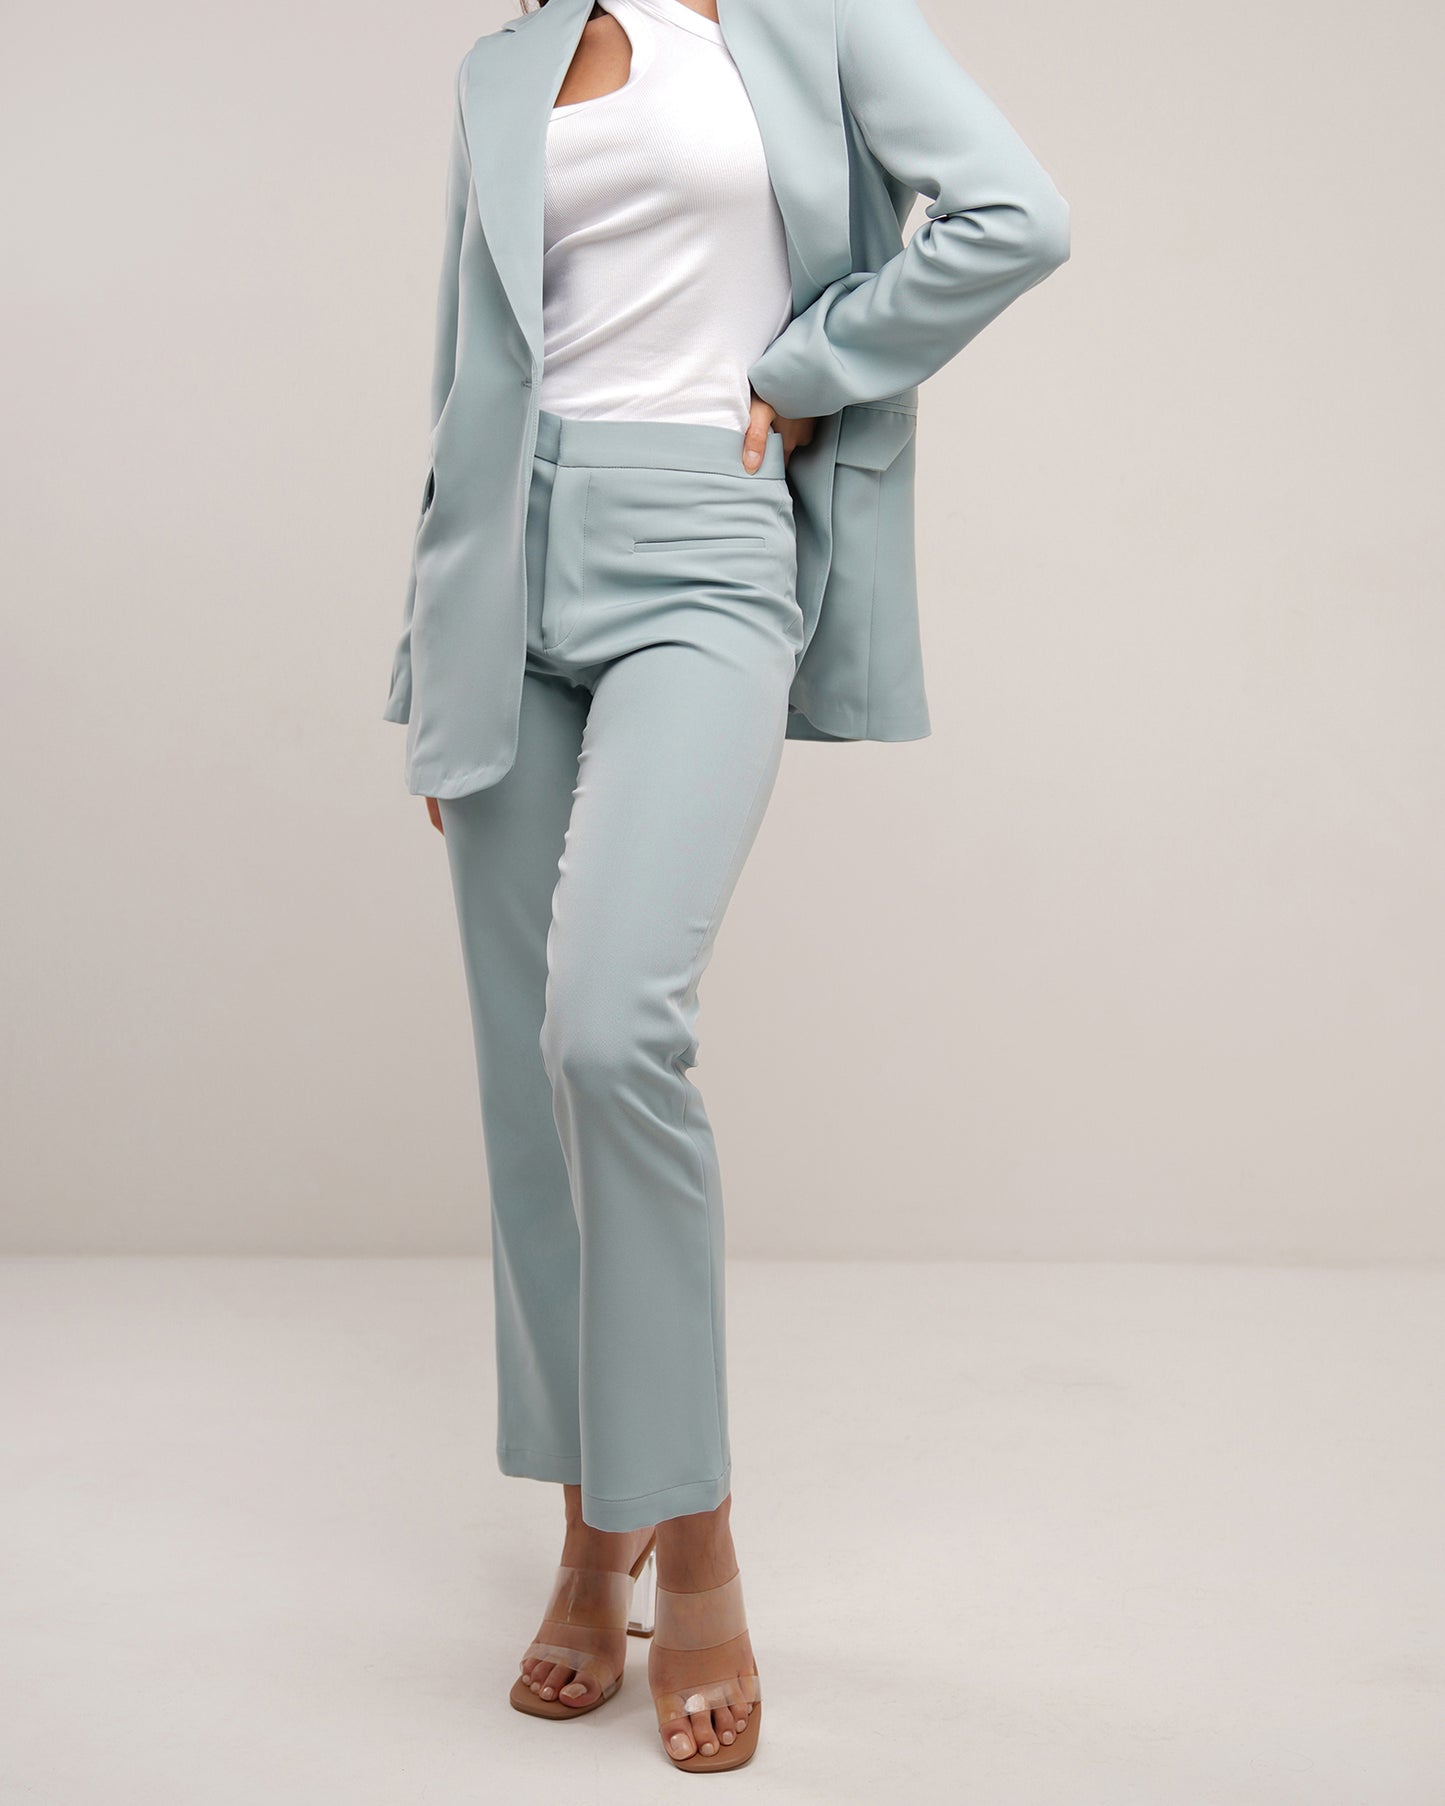 Tiffany blue skies classic jetted pocket flare trousers